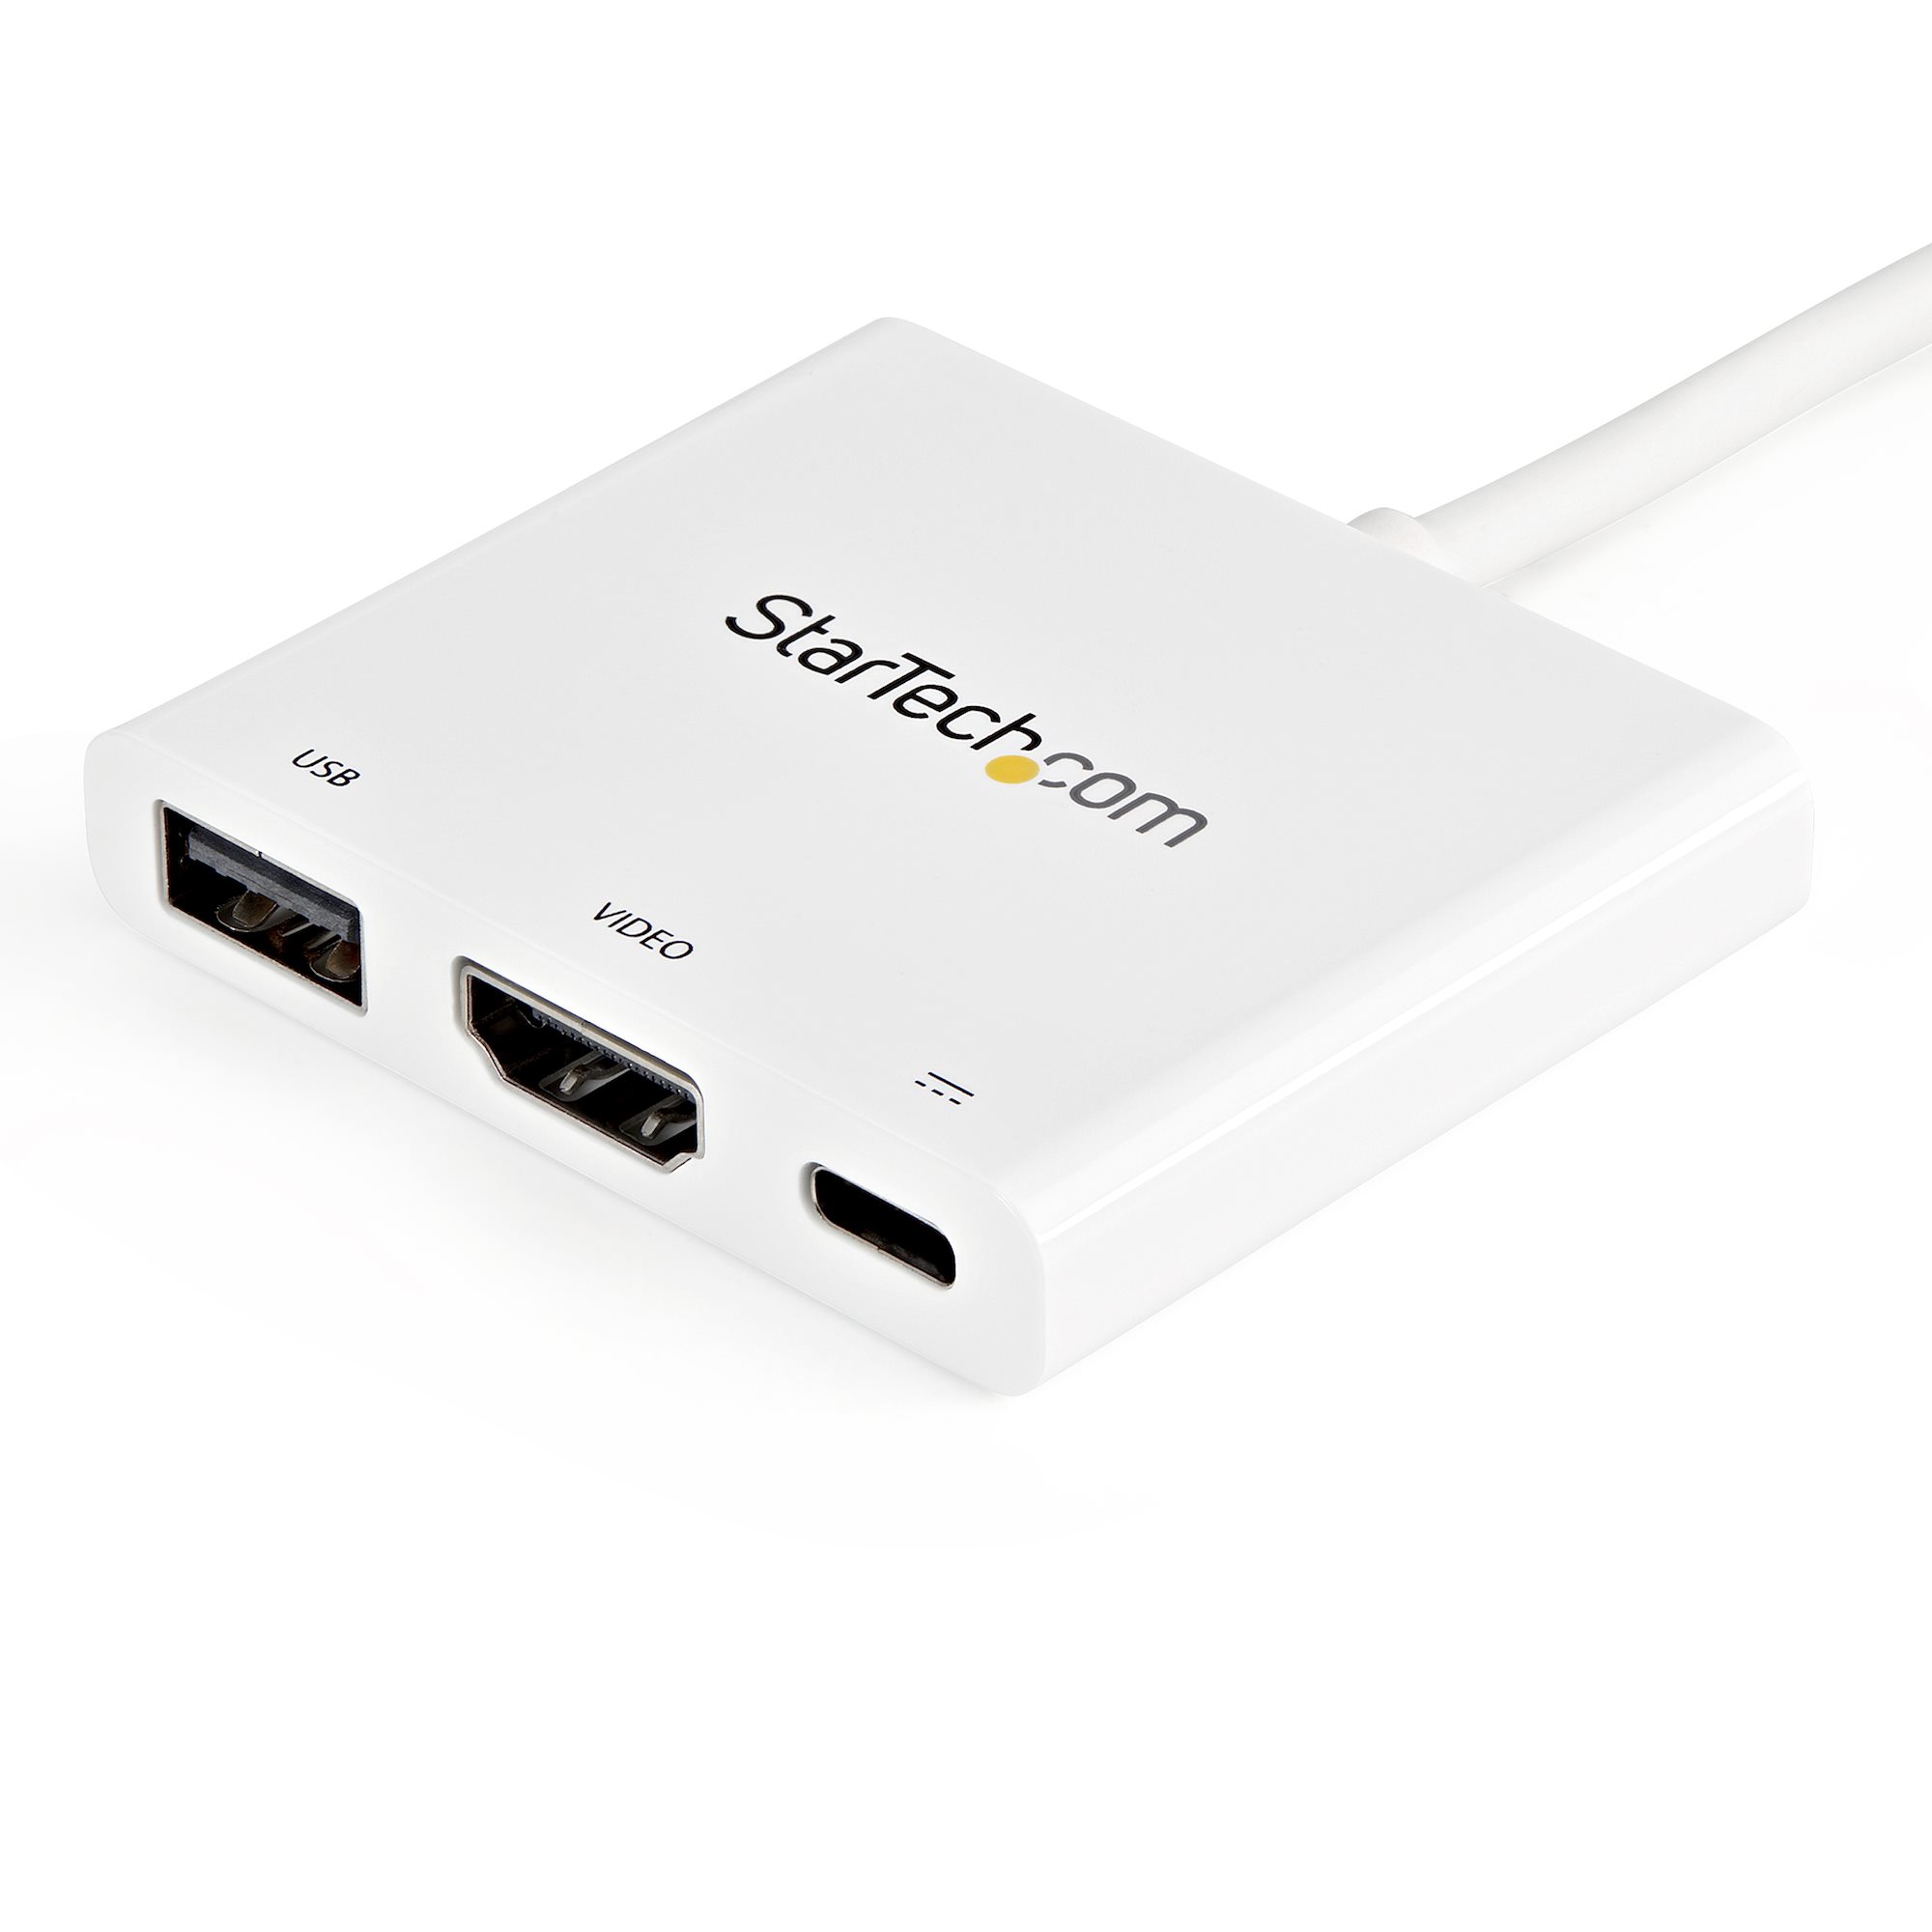 USB-C Multiport Adapter with HDMI - USB 3.0 Port - 60W PD - White